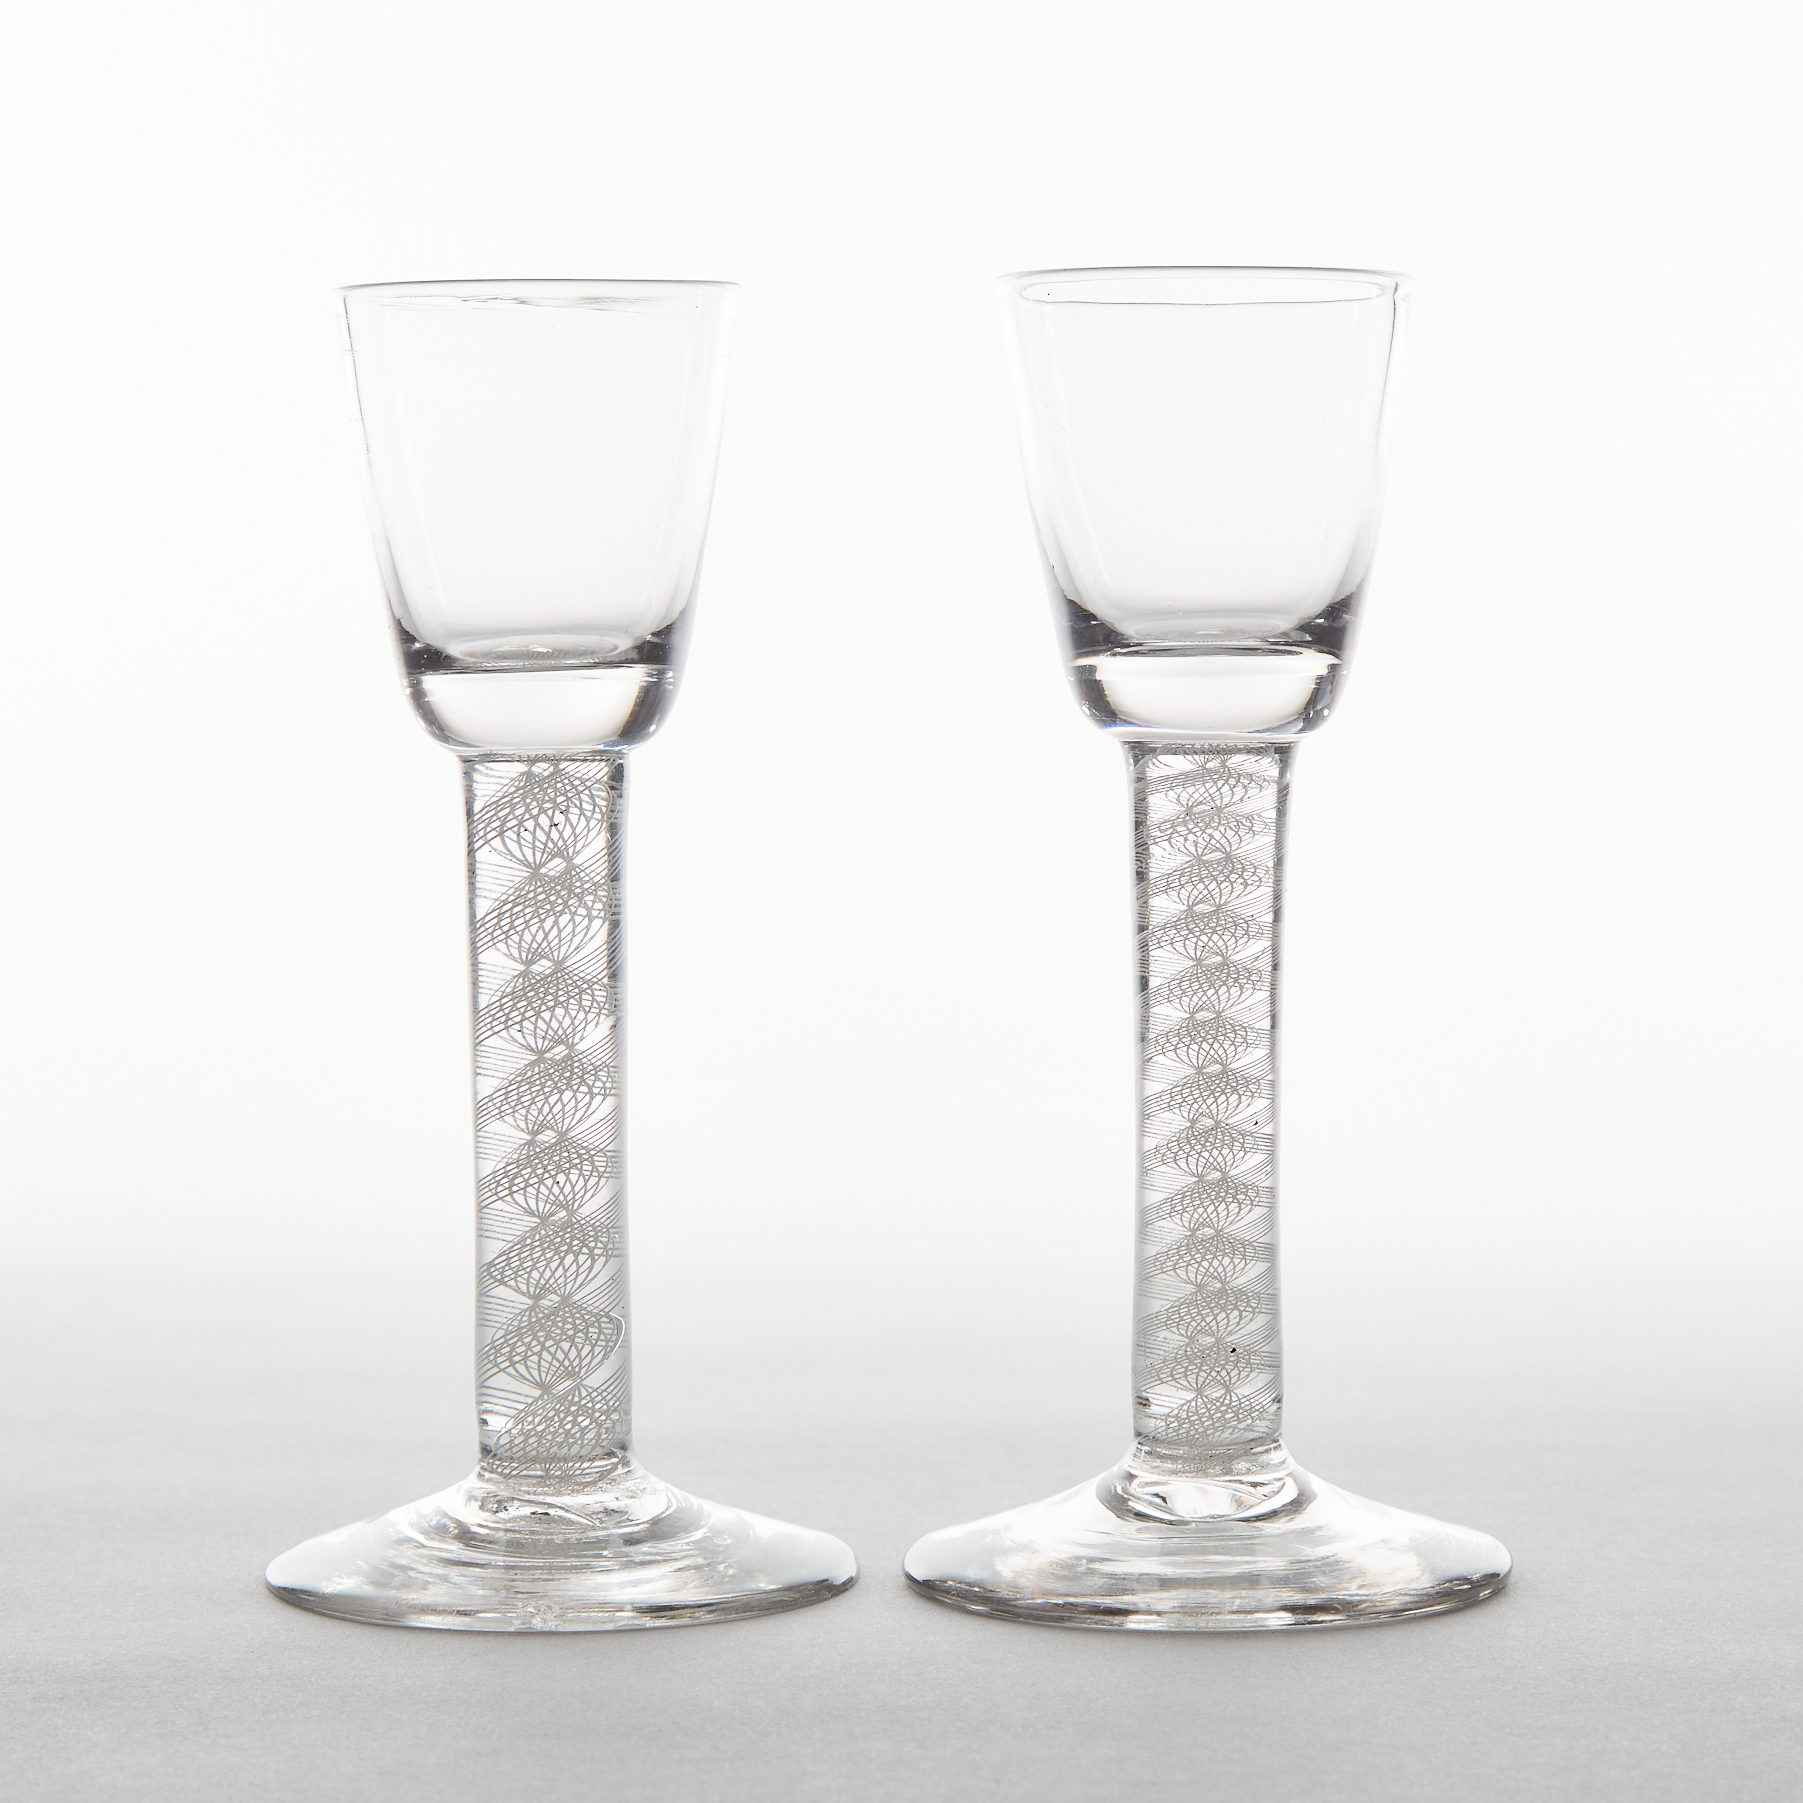 Pair of  English Opaque Twist Stemmed Wine Glasses, c.1760-80